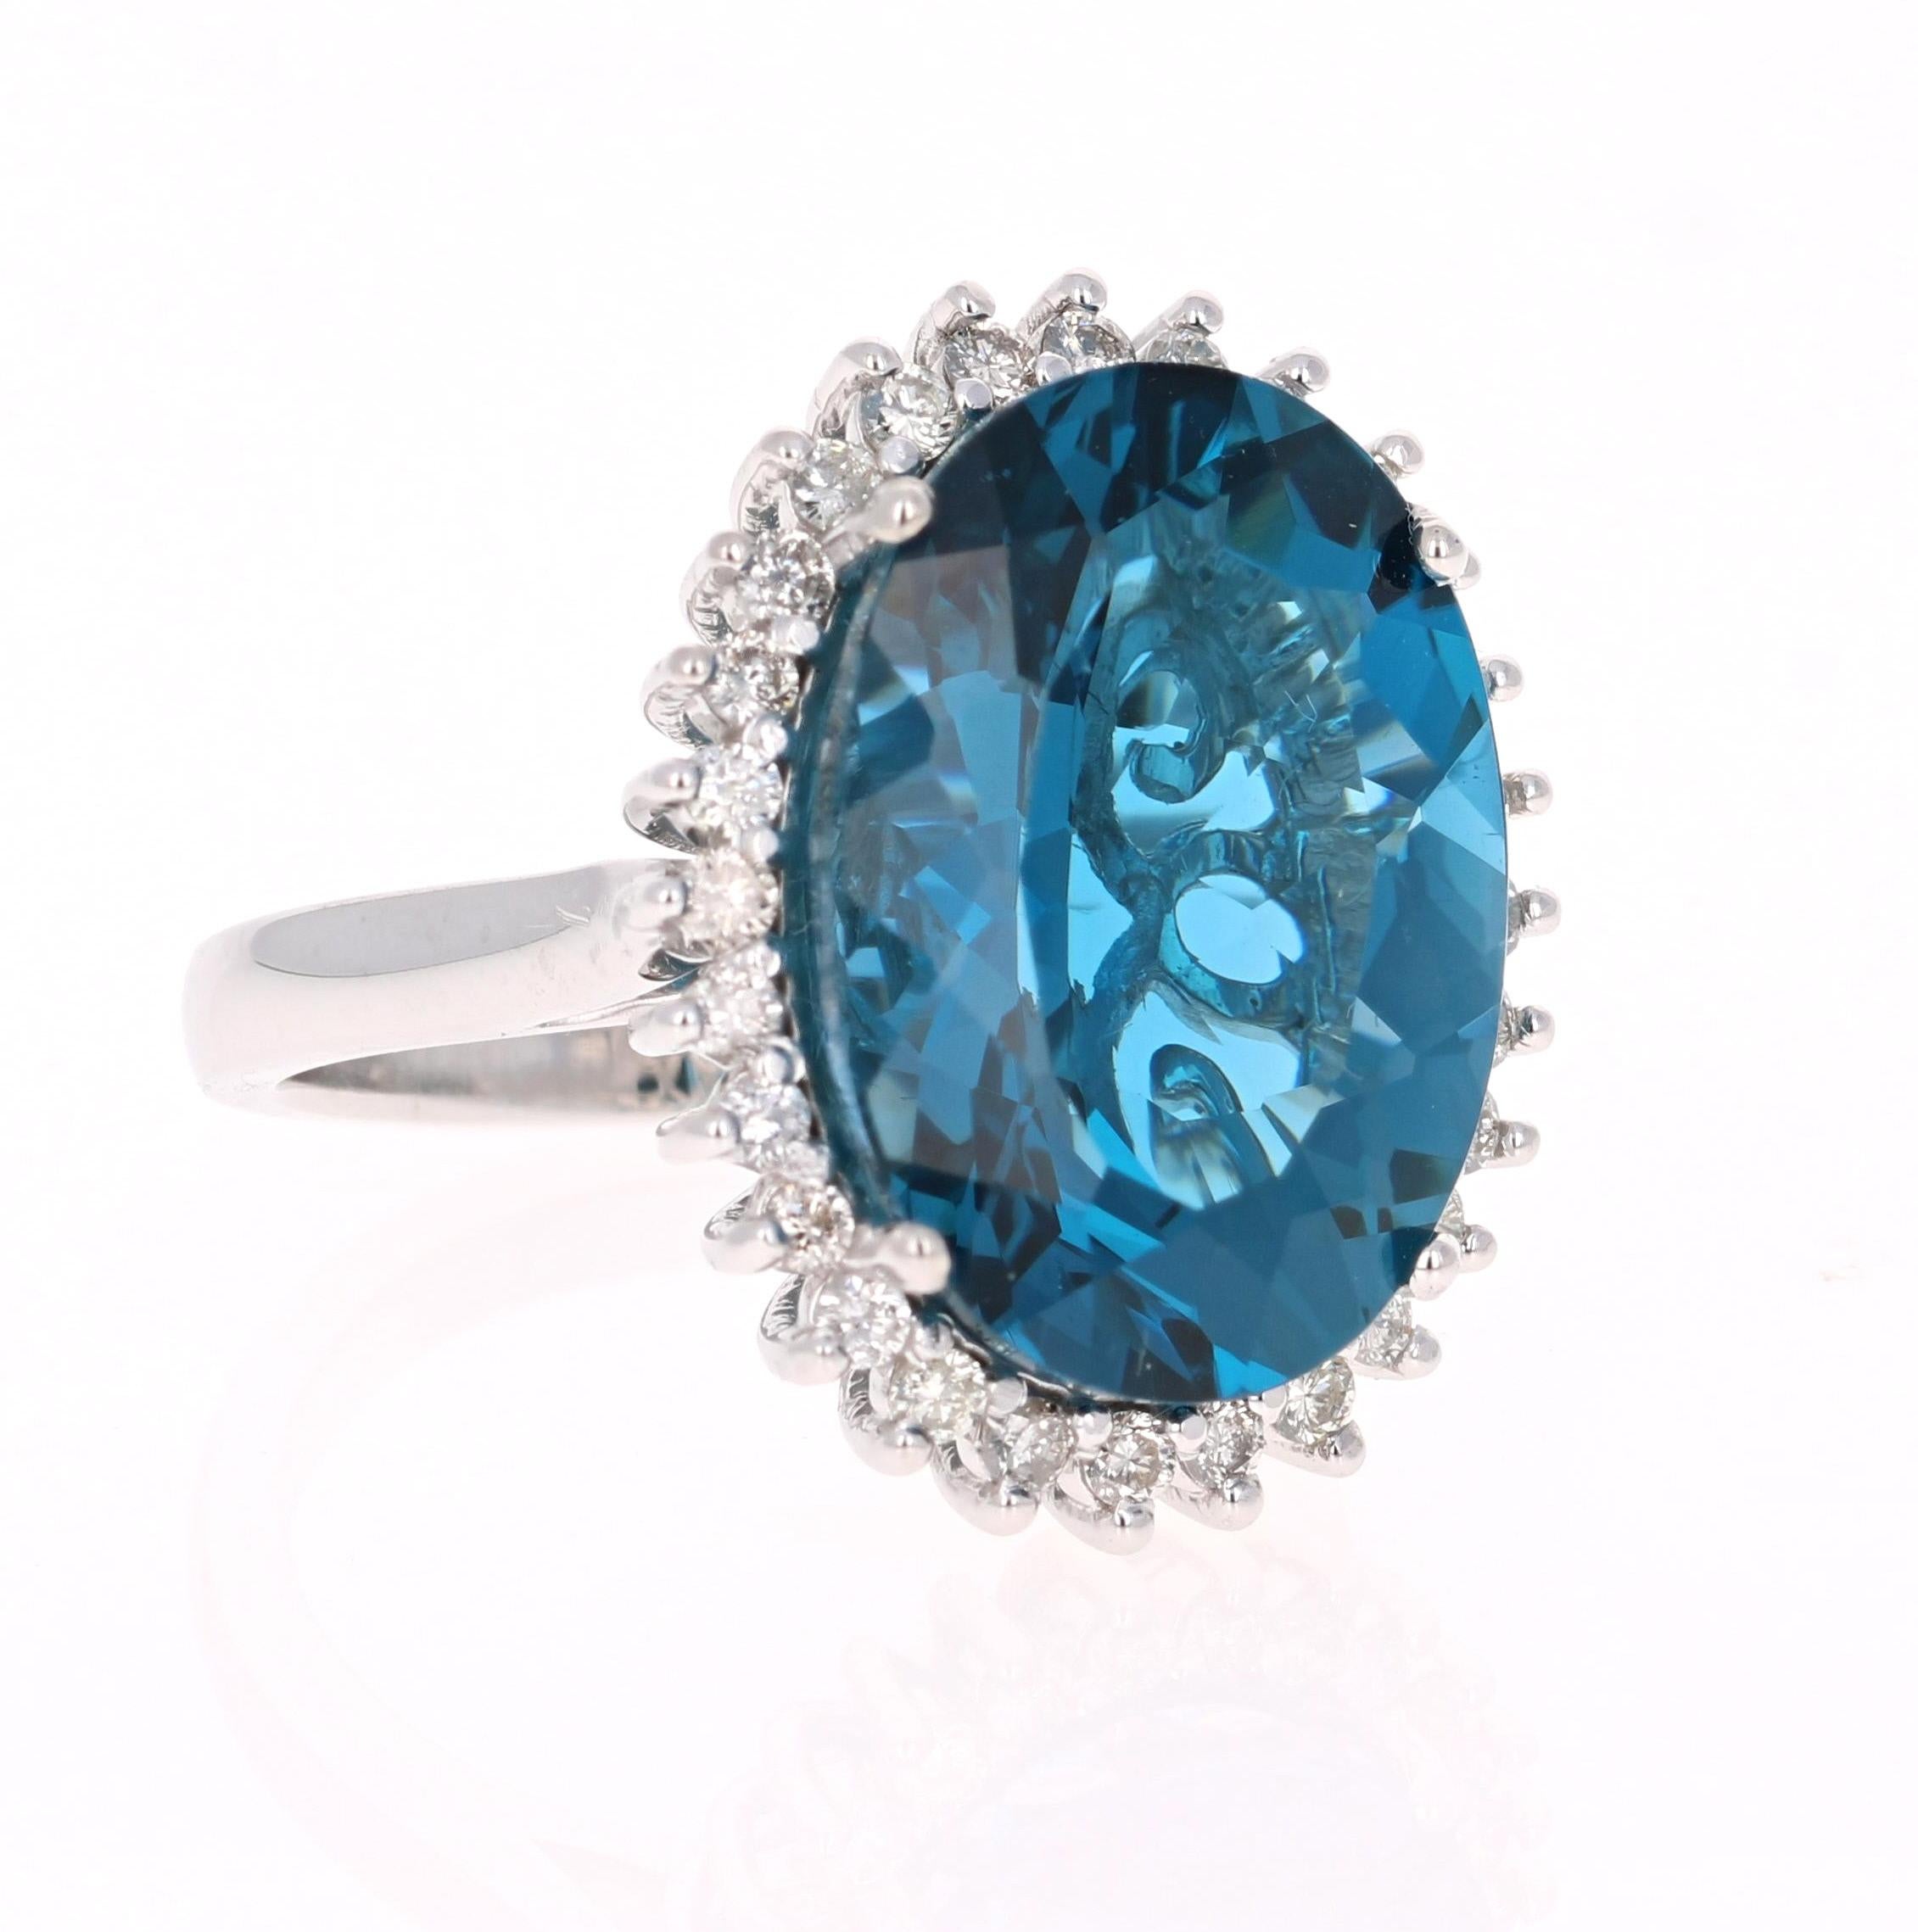 This beautiful Oval cut Blue Topaz and Diamond ring has a stunningly large Blue Topaz that weighs 13.62 Carats. It is surrounded by 28 Round Cut Diamonds that weigh 0.57 Carats. The total carat weight of the ring is 14.19 Carats. 
The setting is